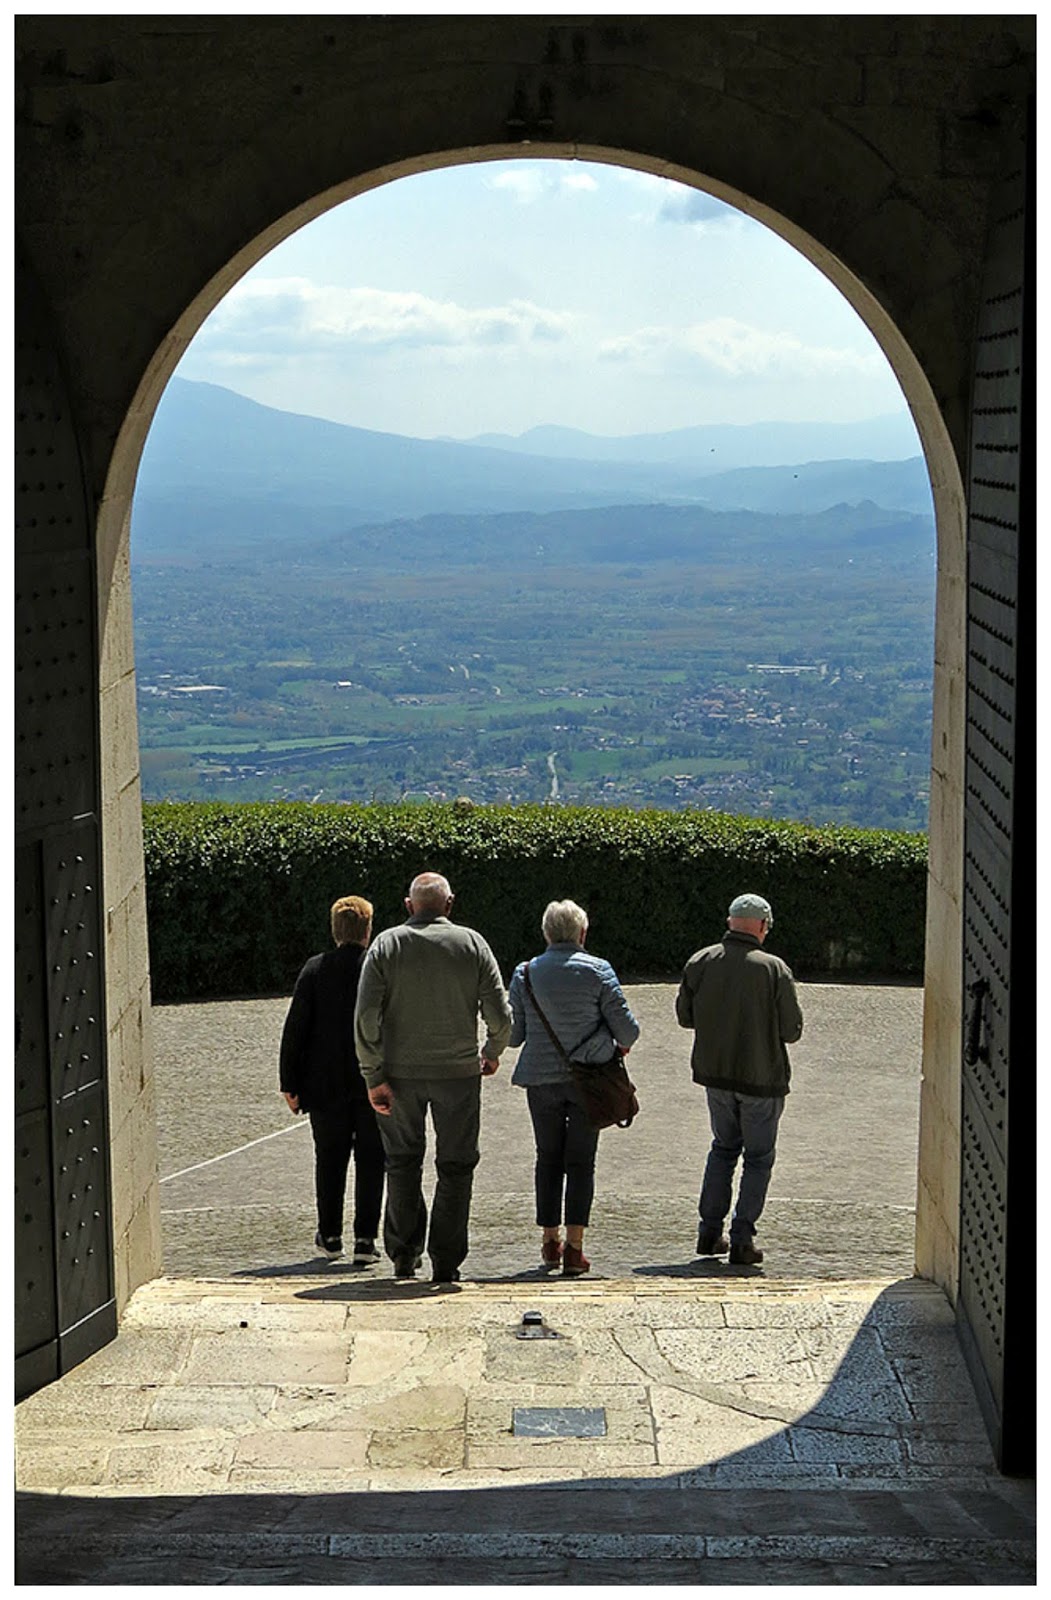 In Soul Grand Tour of Italy Montecassino image pic image